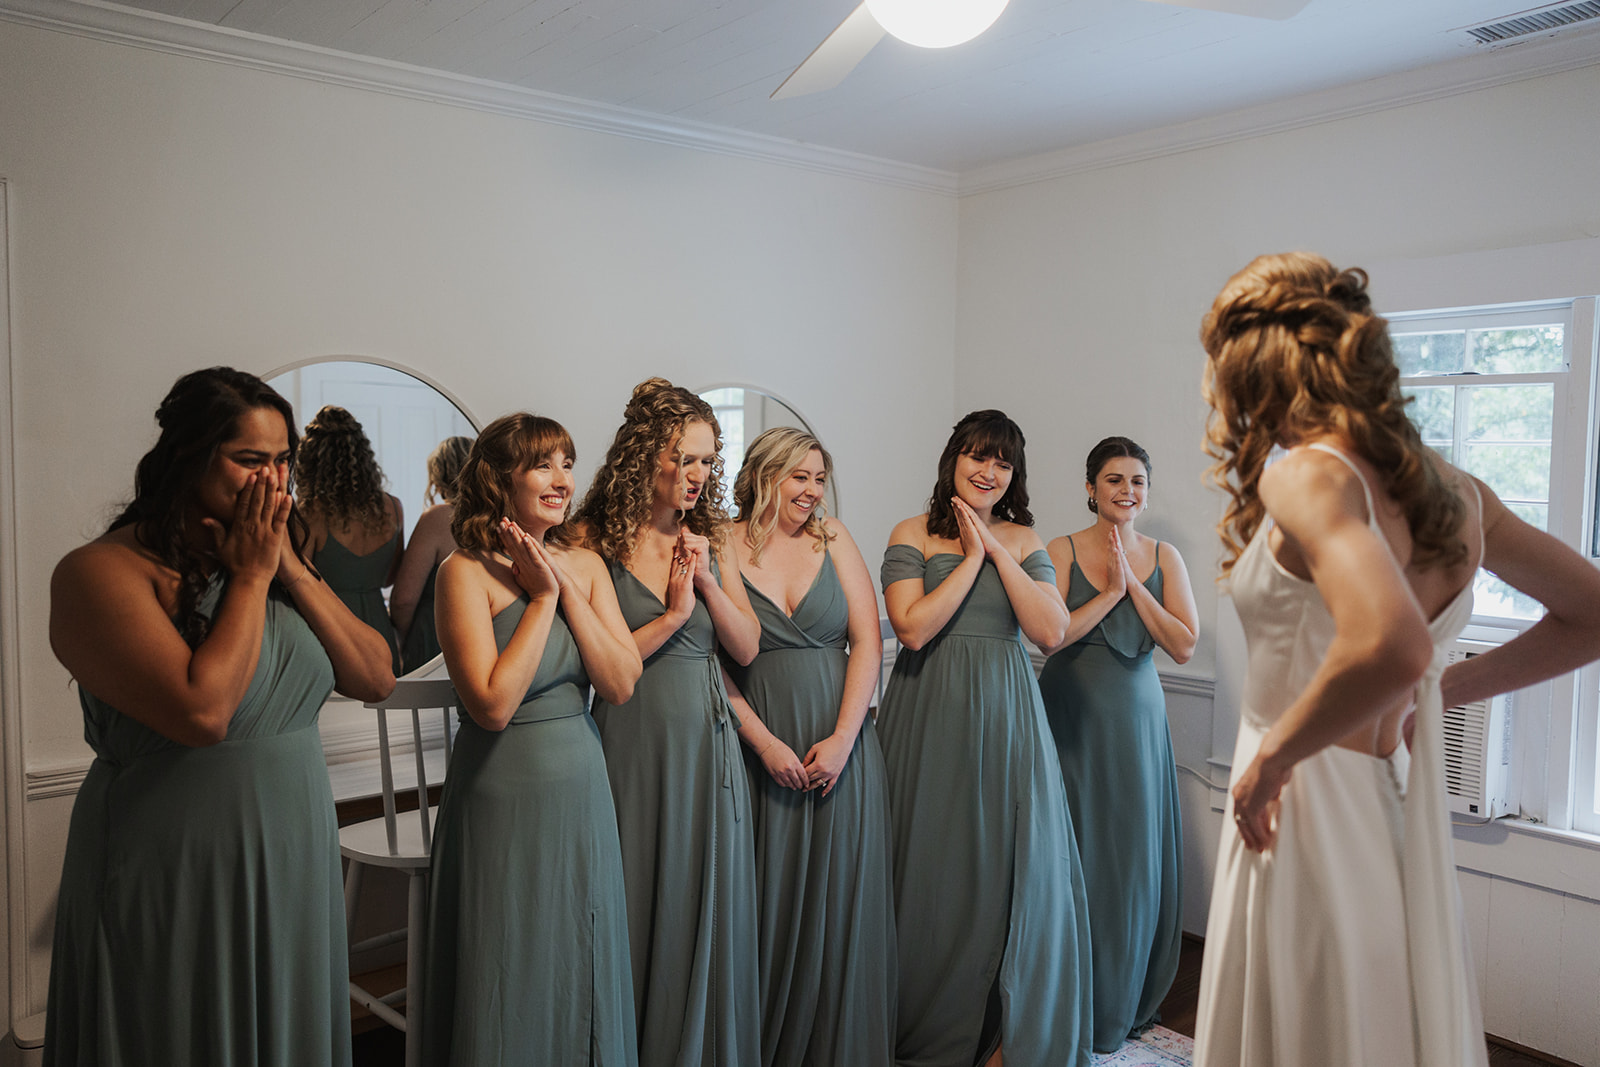 Bridesmaids pose together with the bride after her big wedding day